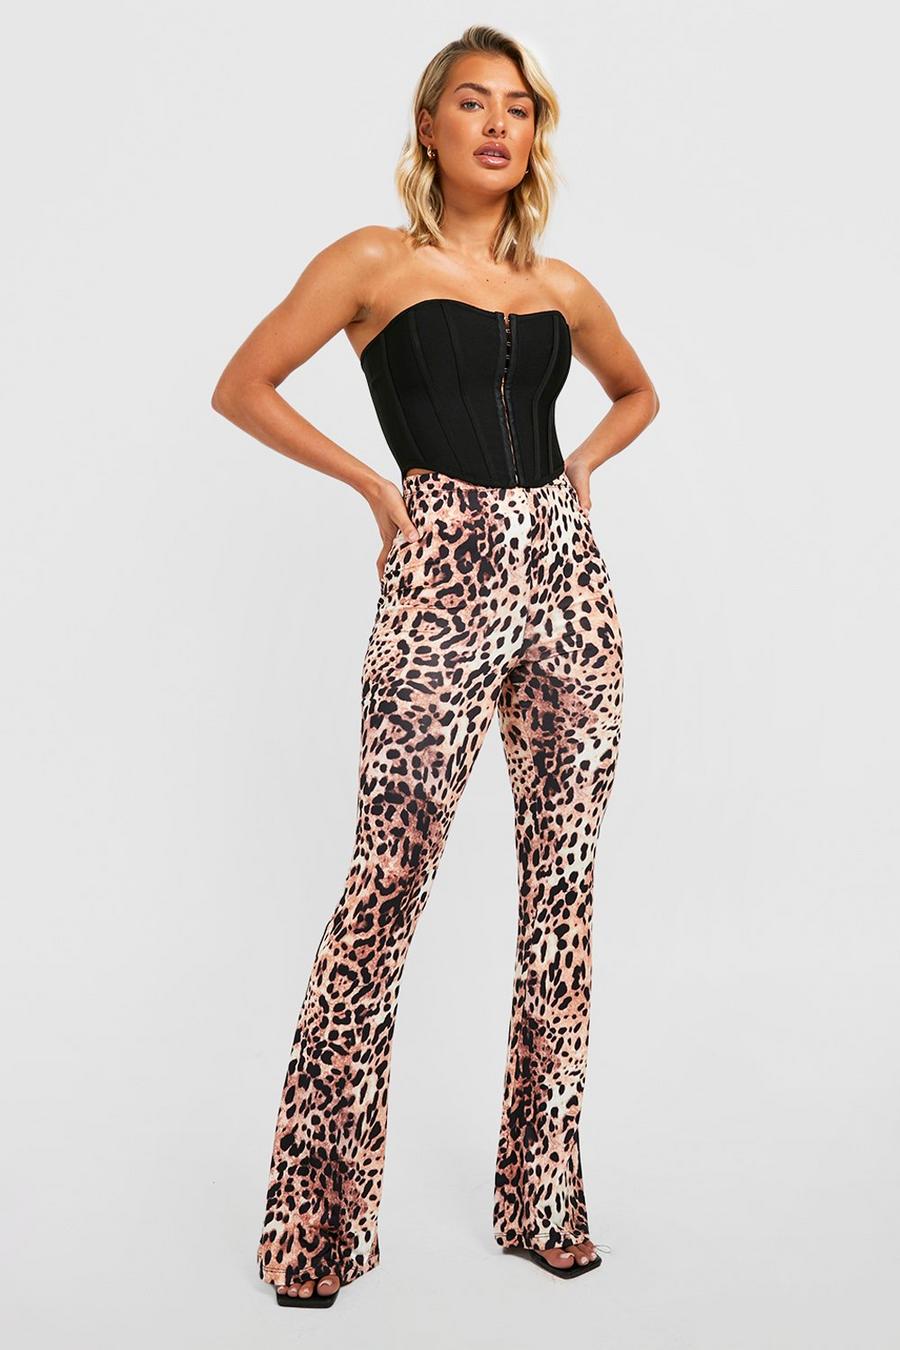 Tan brown Leopard Print Recycled Slinky Flared Trouser